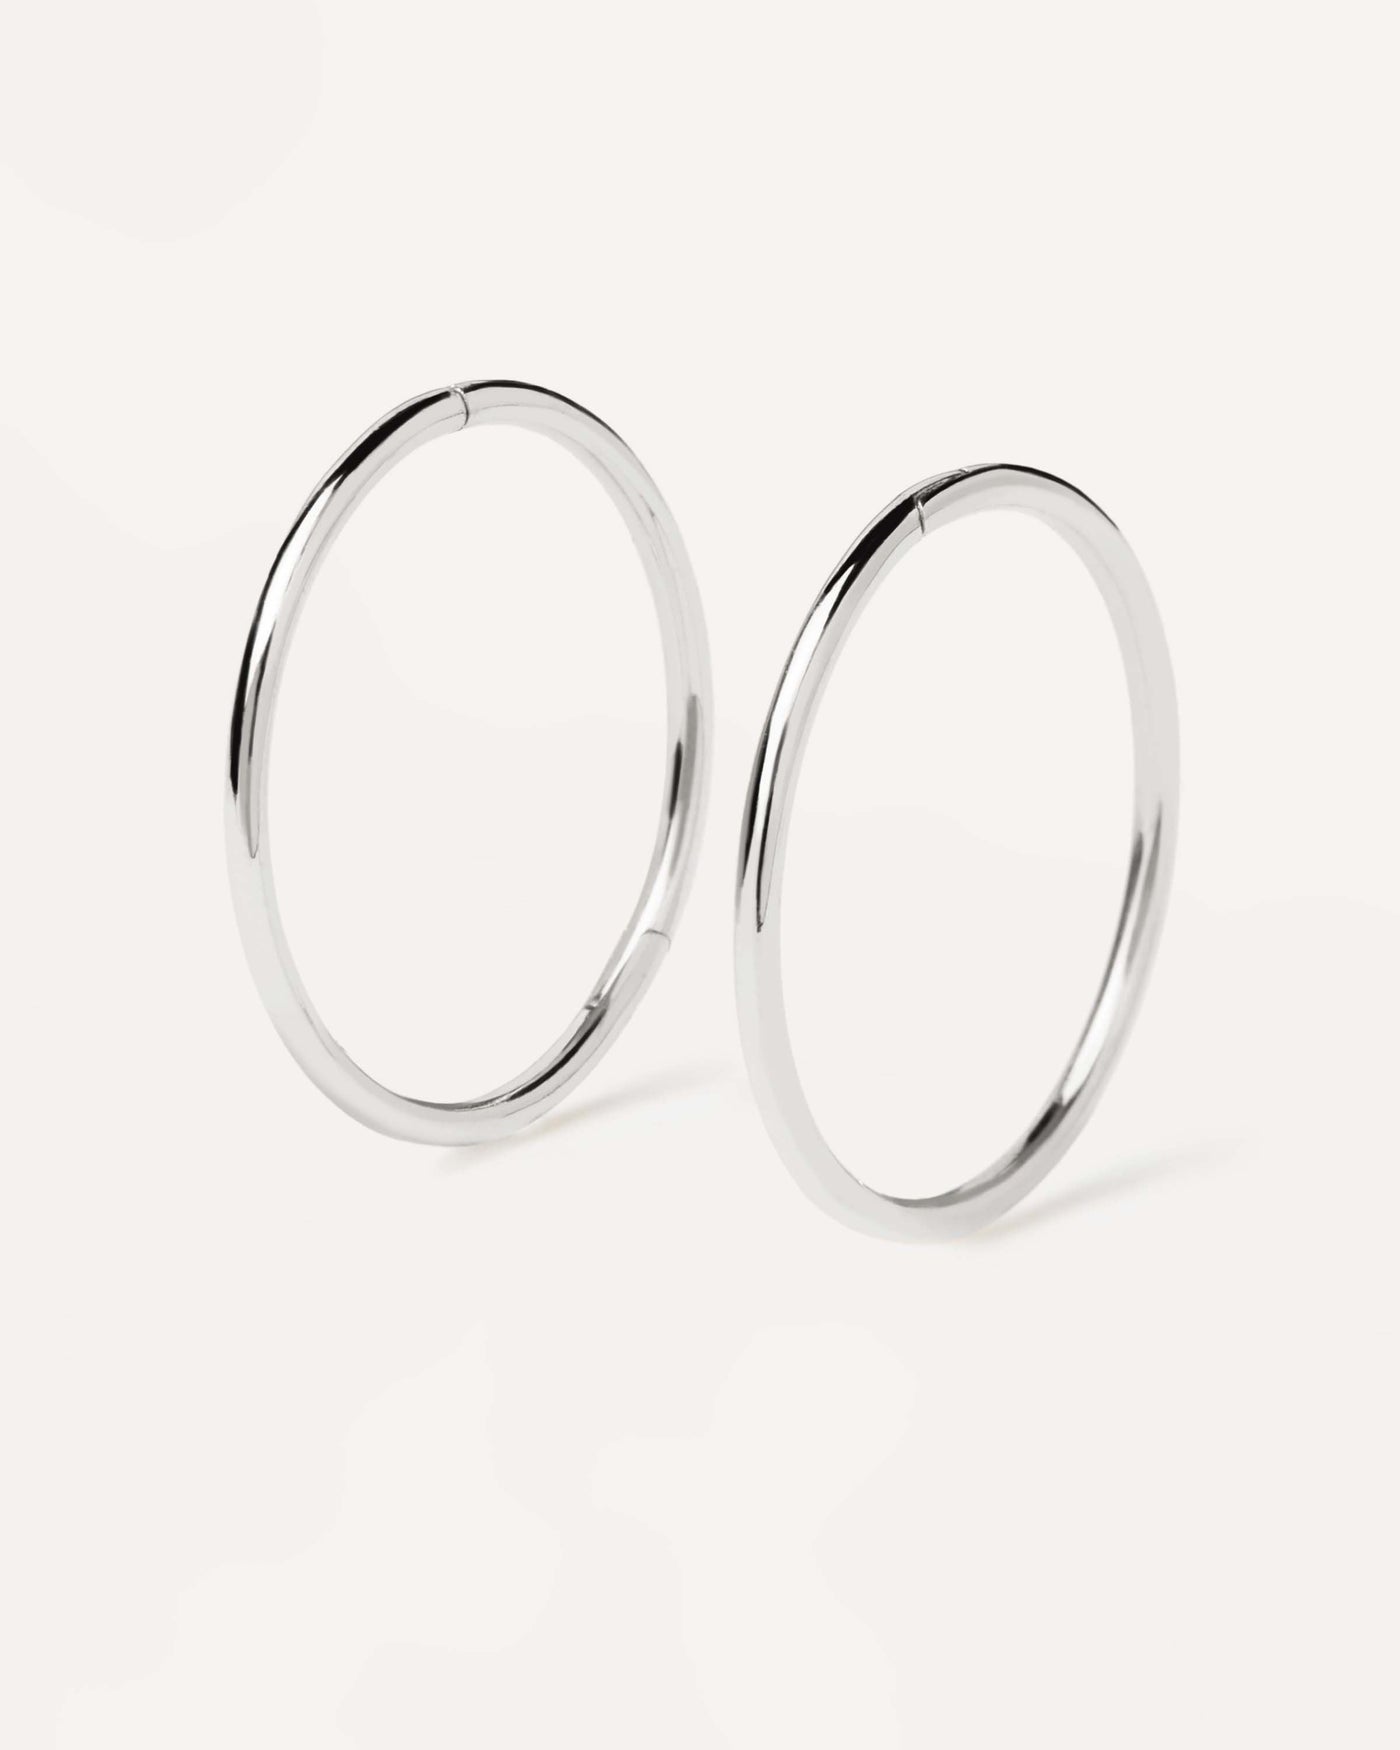 2023 Selection | White Gold Essential Mini Hoops. Perfect circle small hoops with plain design, made of recycled white gold. Get the latest arrival from PDPAOLA. Place your order safely and get this Best Seller. Free Shipping.